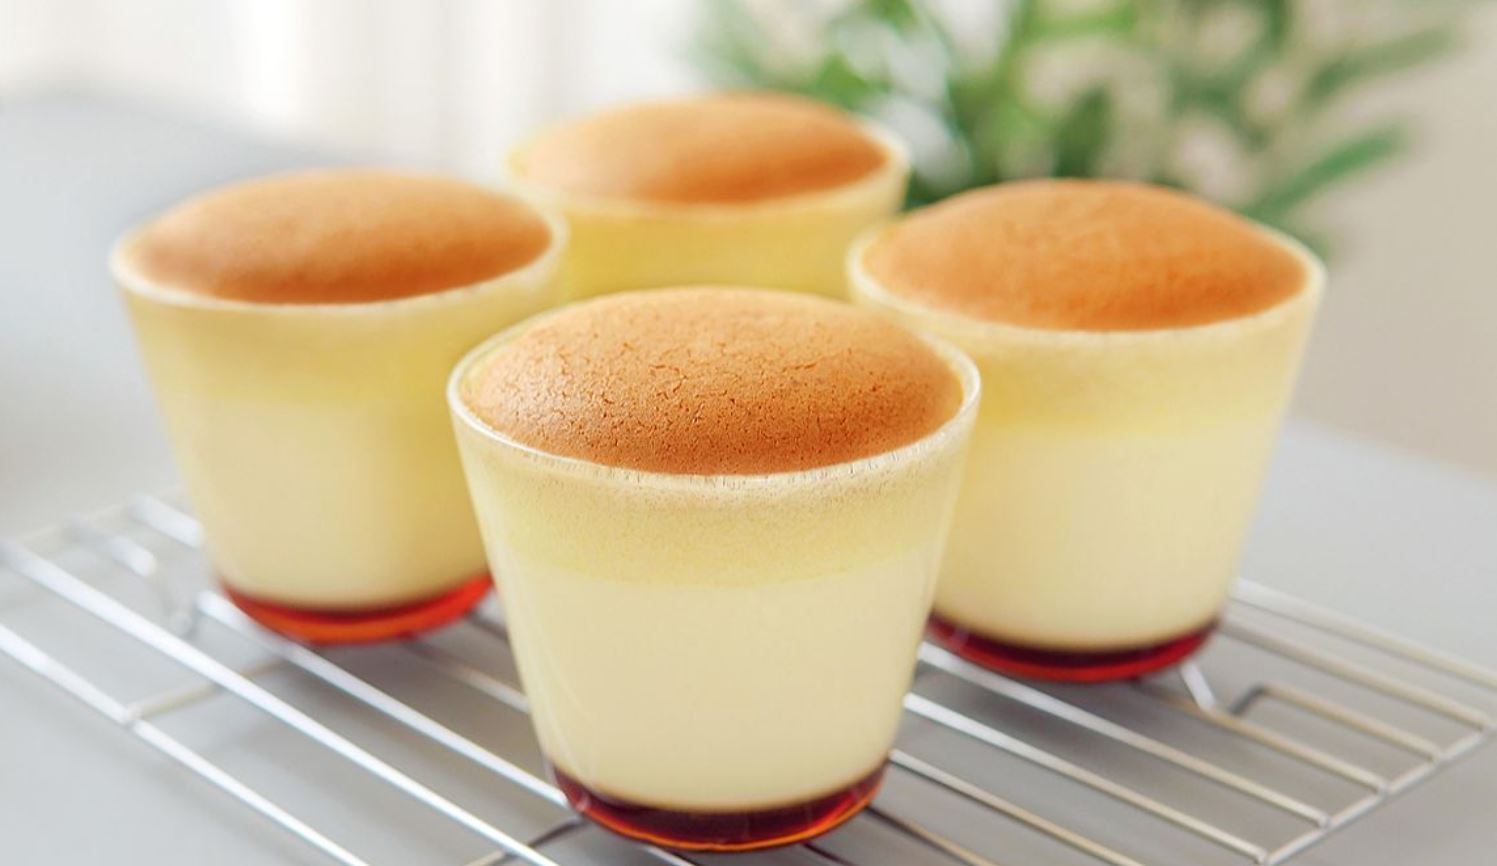 Can you use pudding for cake filling? - Quora